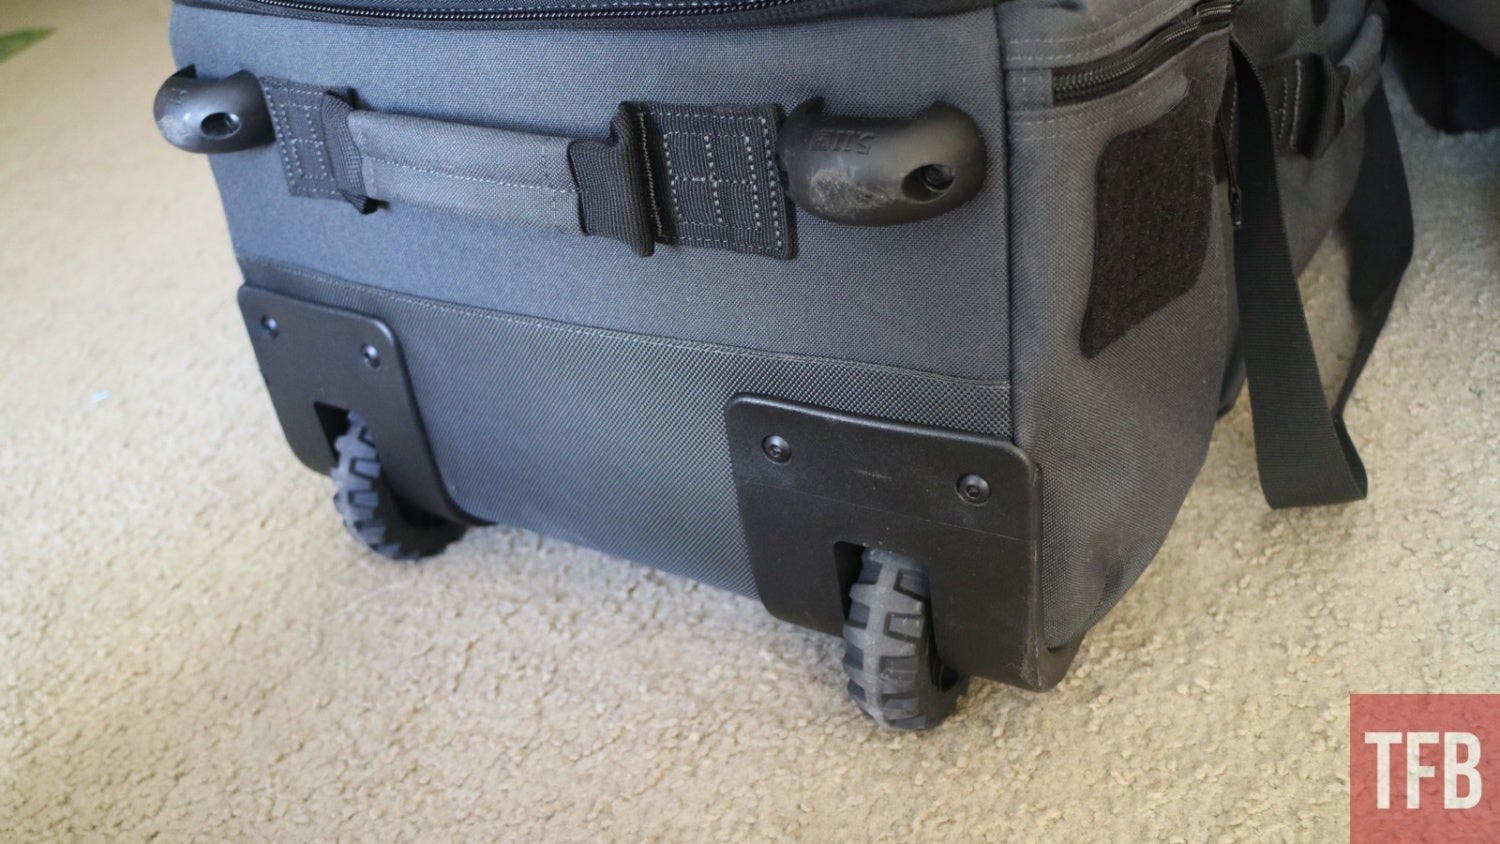 TFB Review: Traveling With the 5.11 Mission Ready 3.0